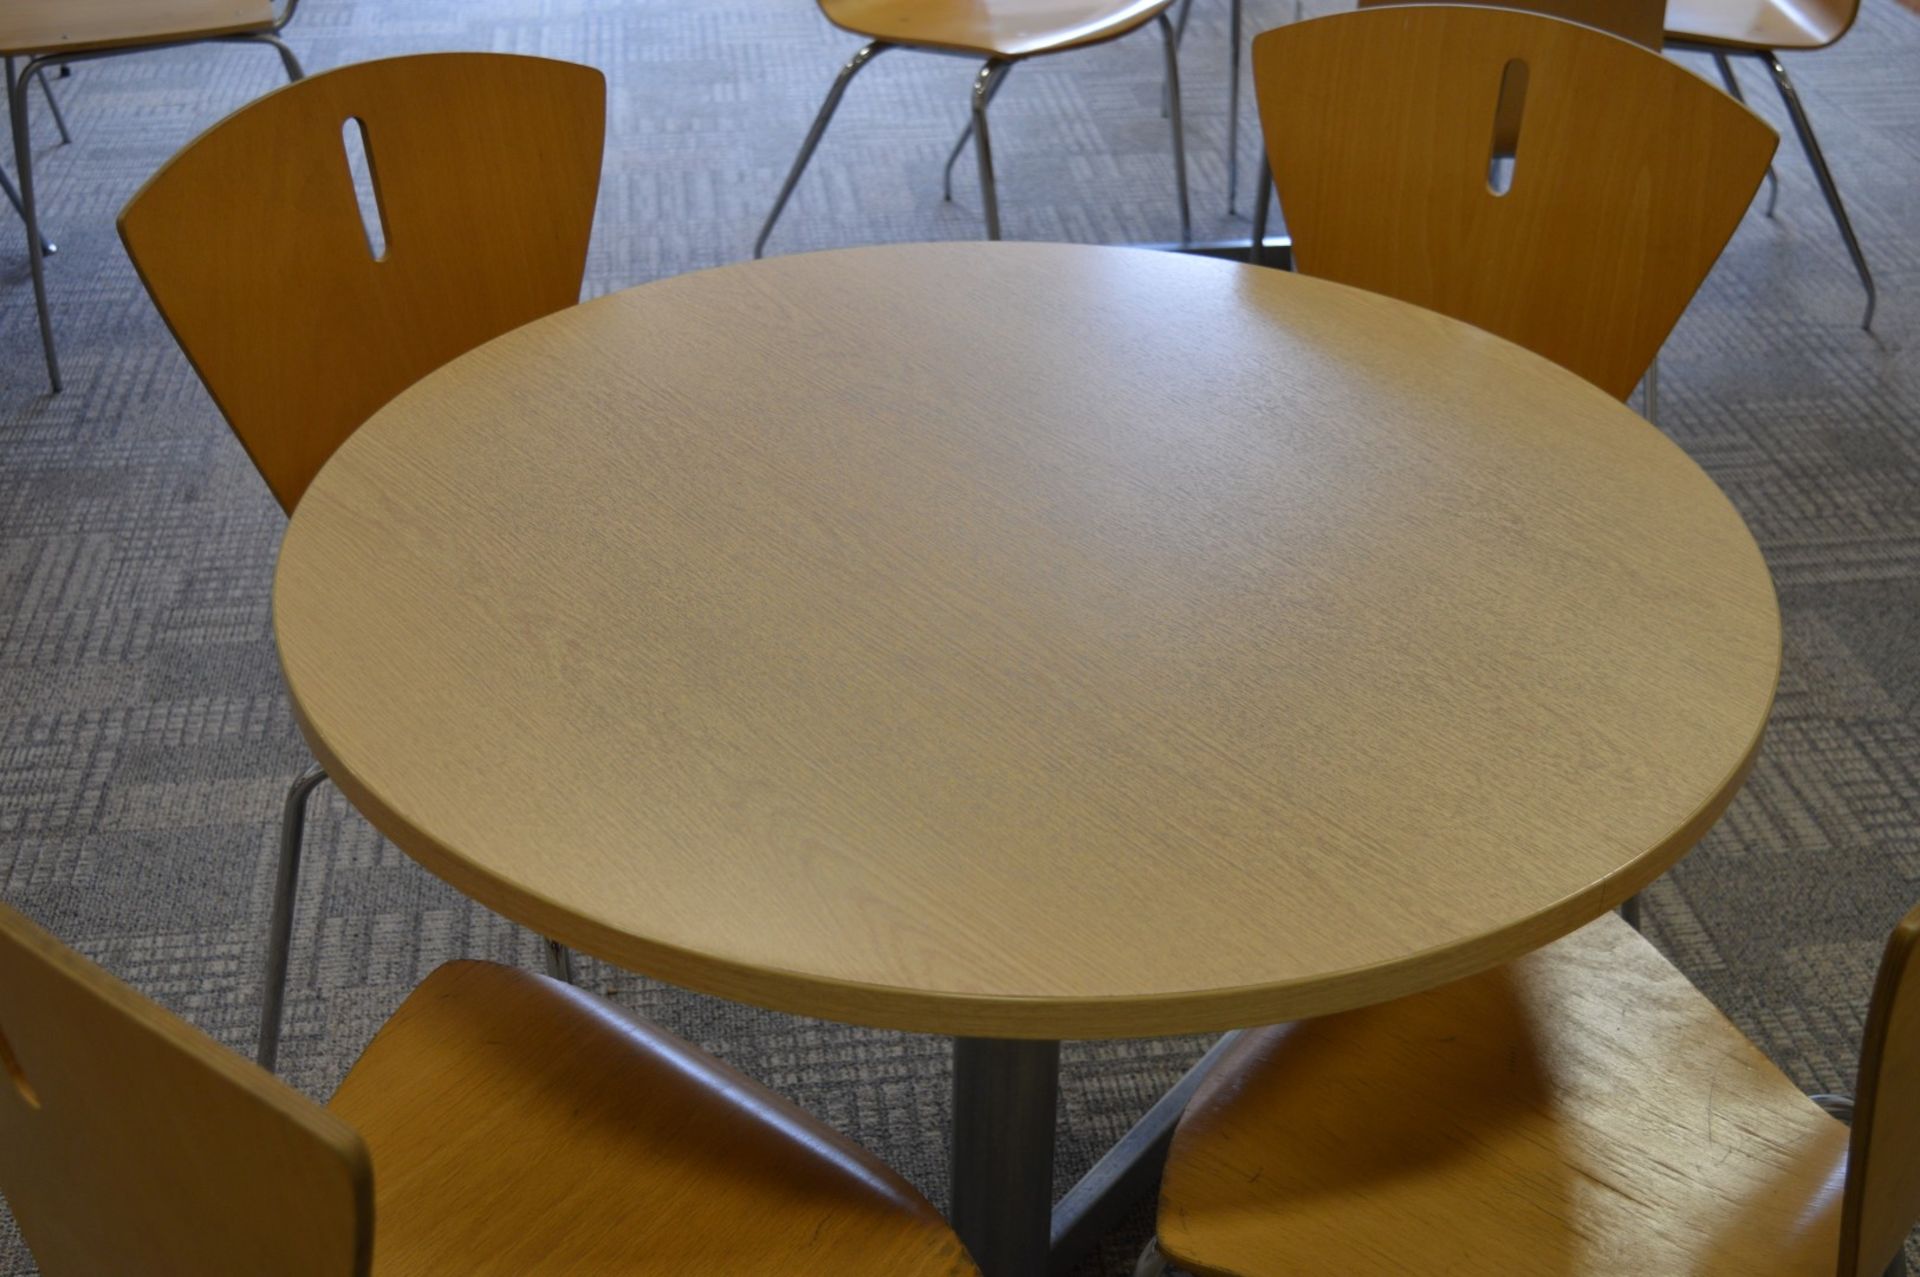 1 x Staff Room Table With Four Matching Chairs - Oak Table Finish and Beech Chairs - Contemporay - Image 3 of 4